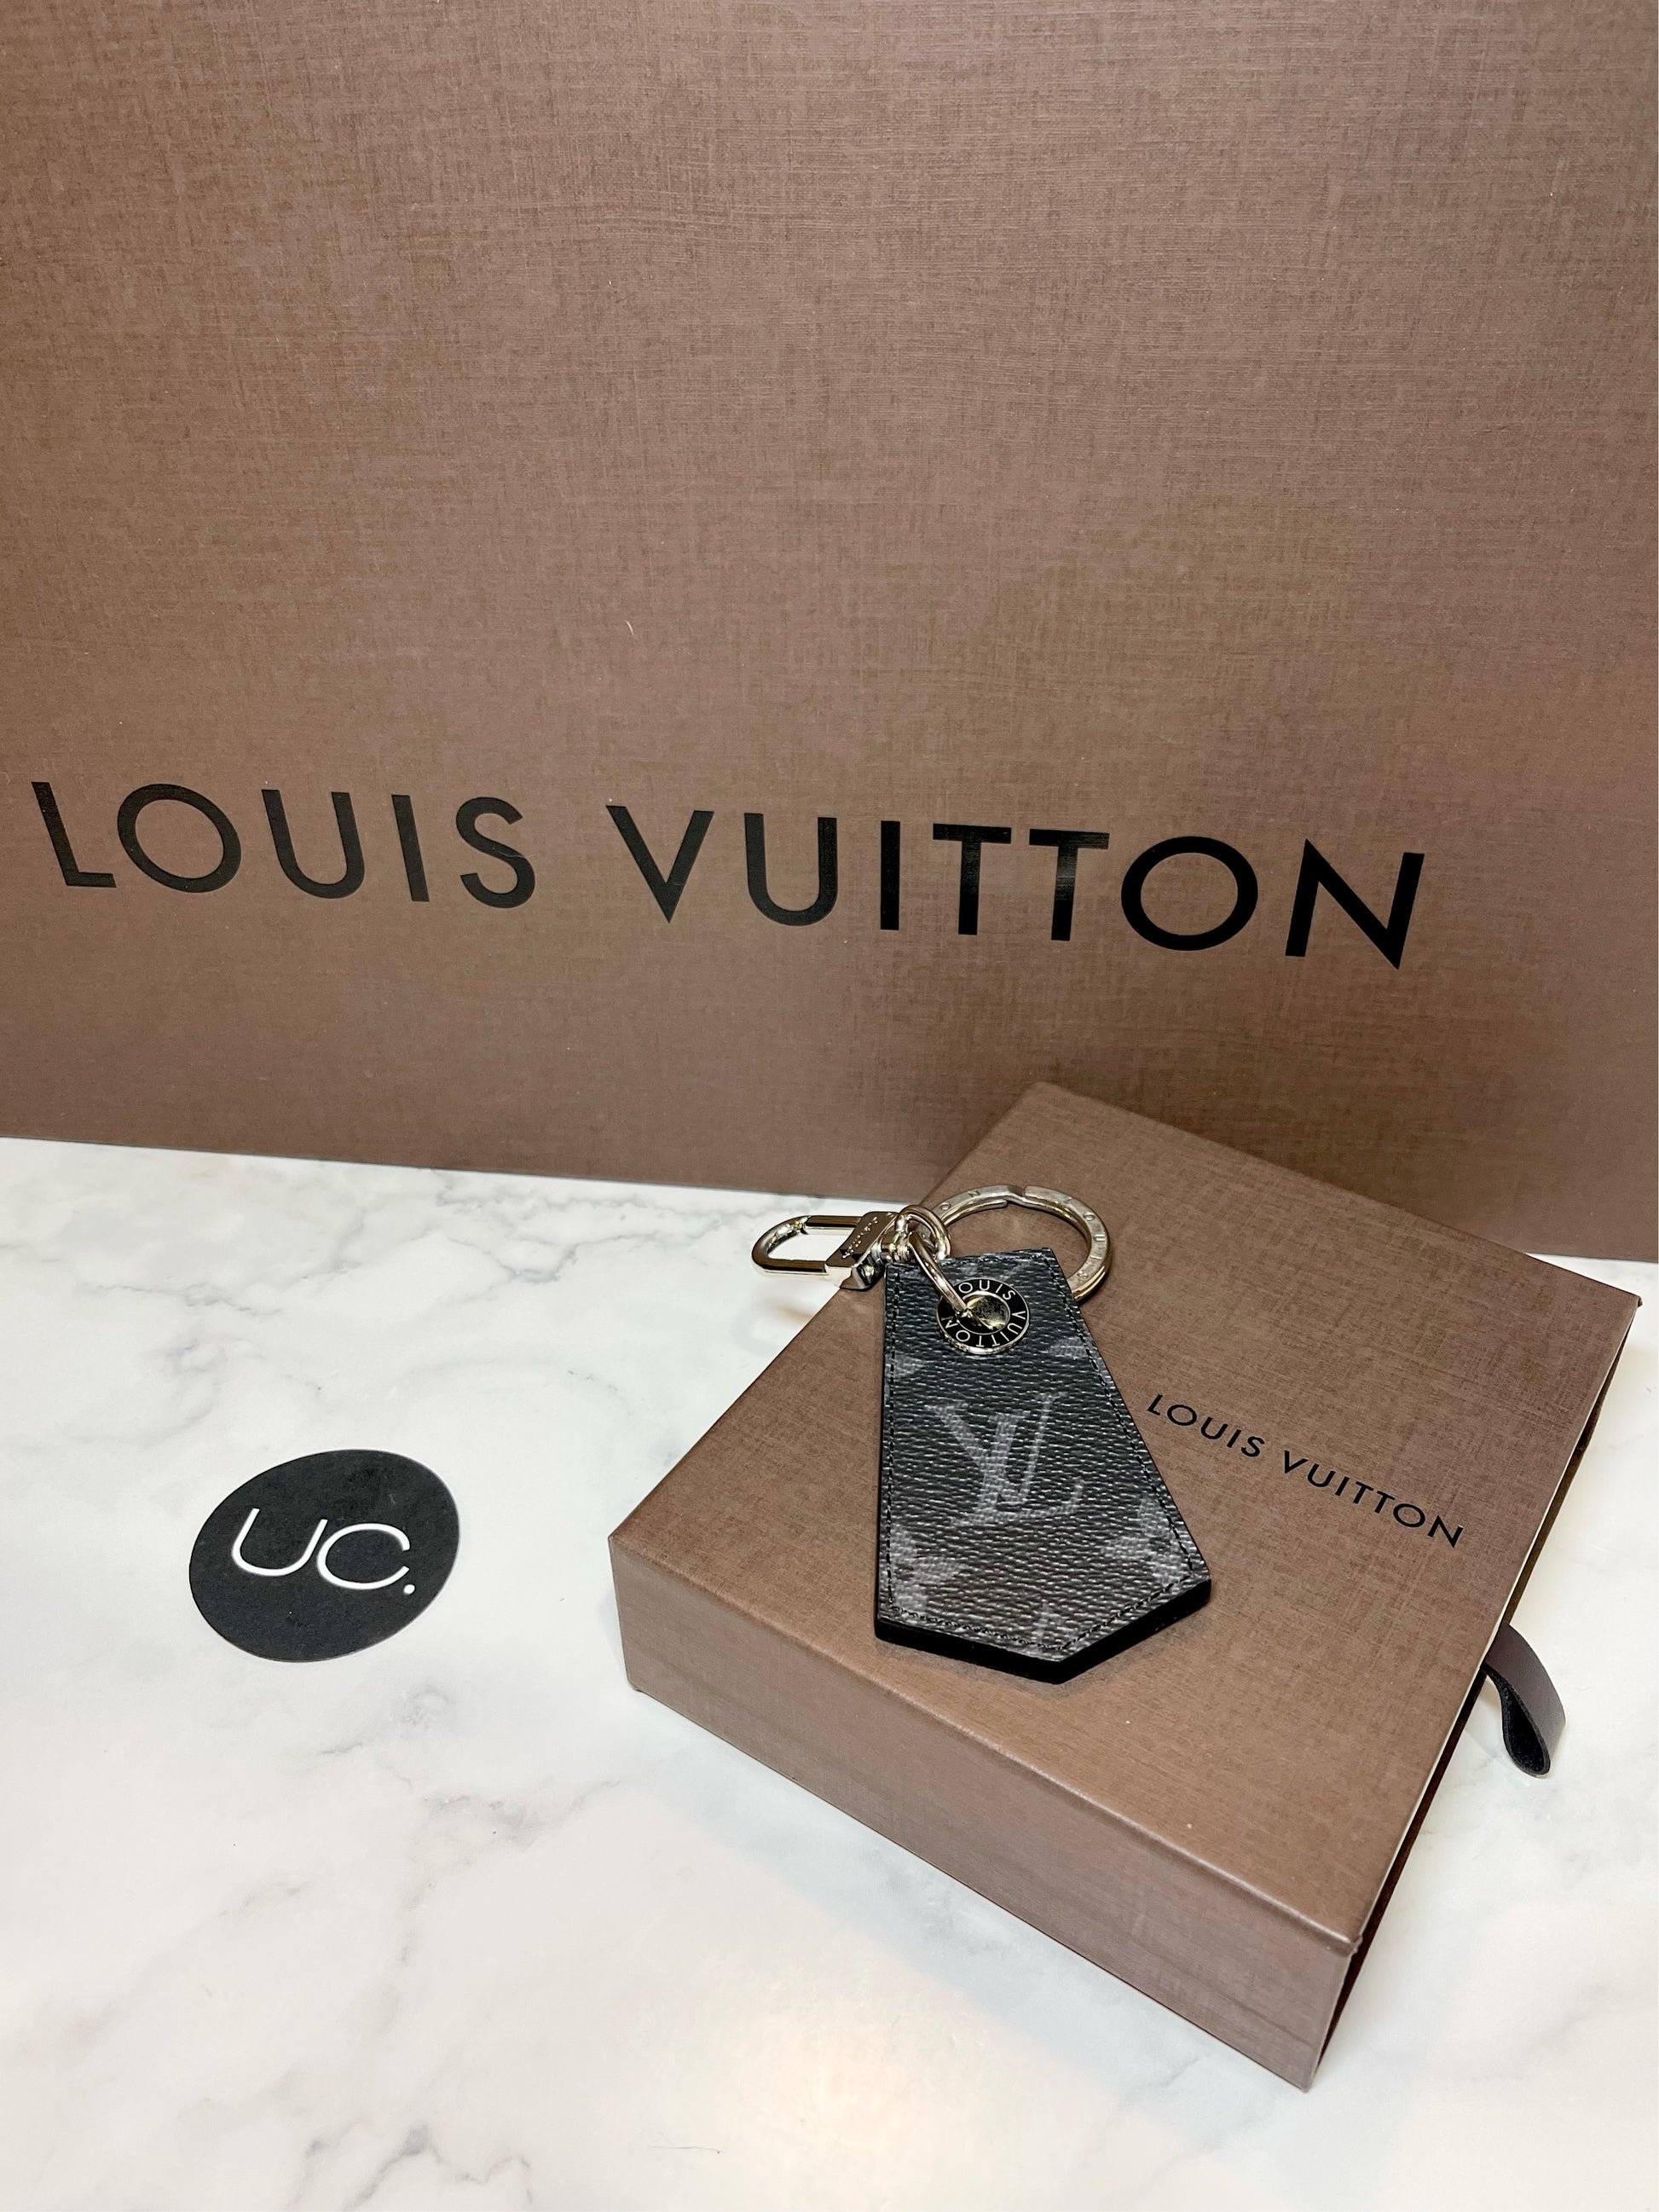 Review: Louis Vuitton Key Pouch  What It Looks Like + How to Open